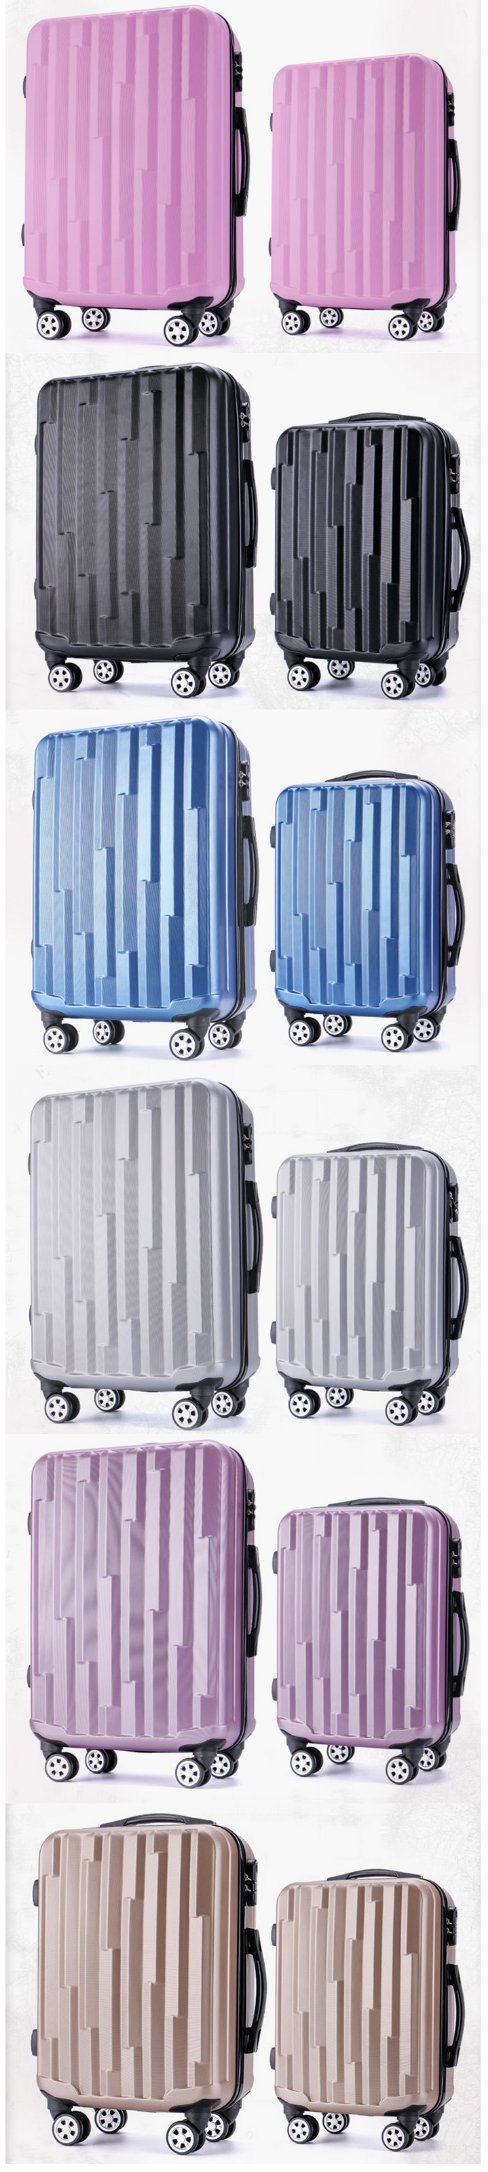 ABS Sets Manufacture High Quality Luggage Case